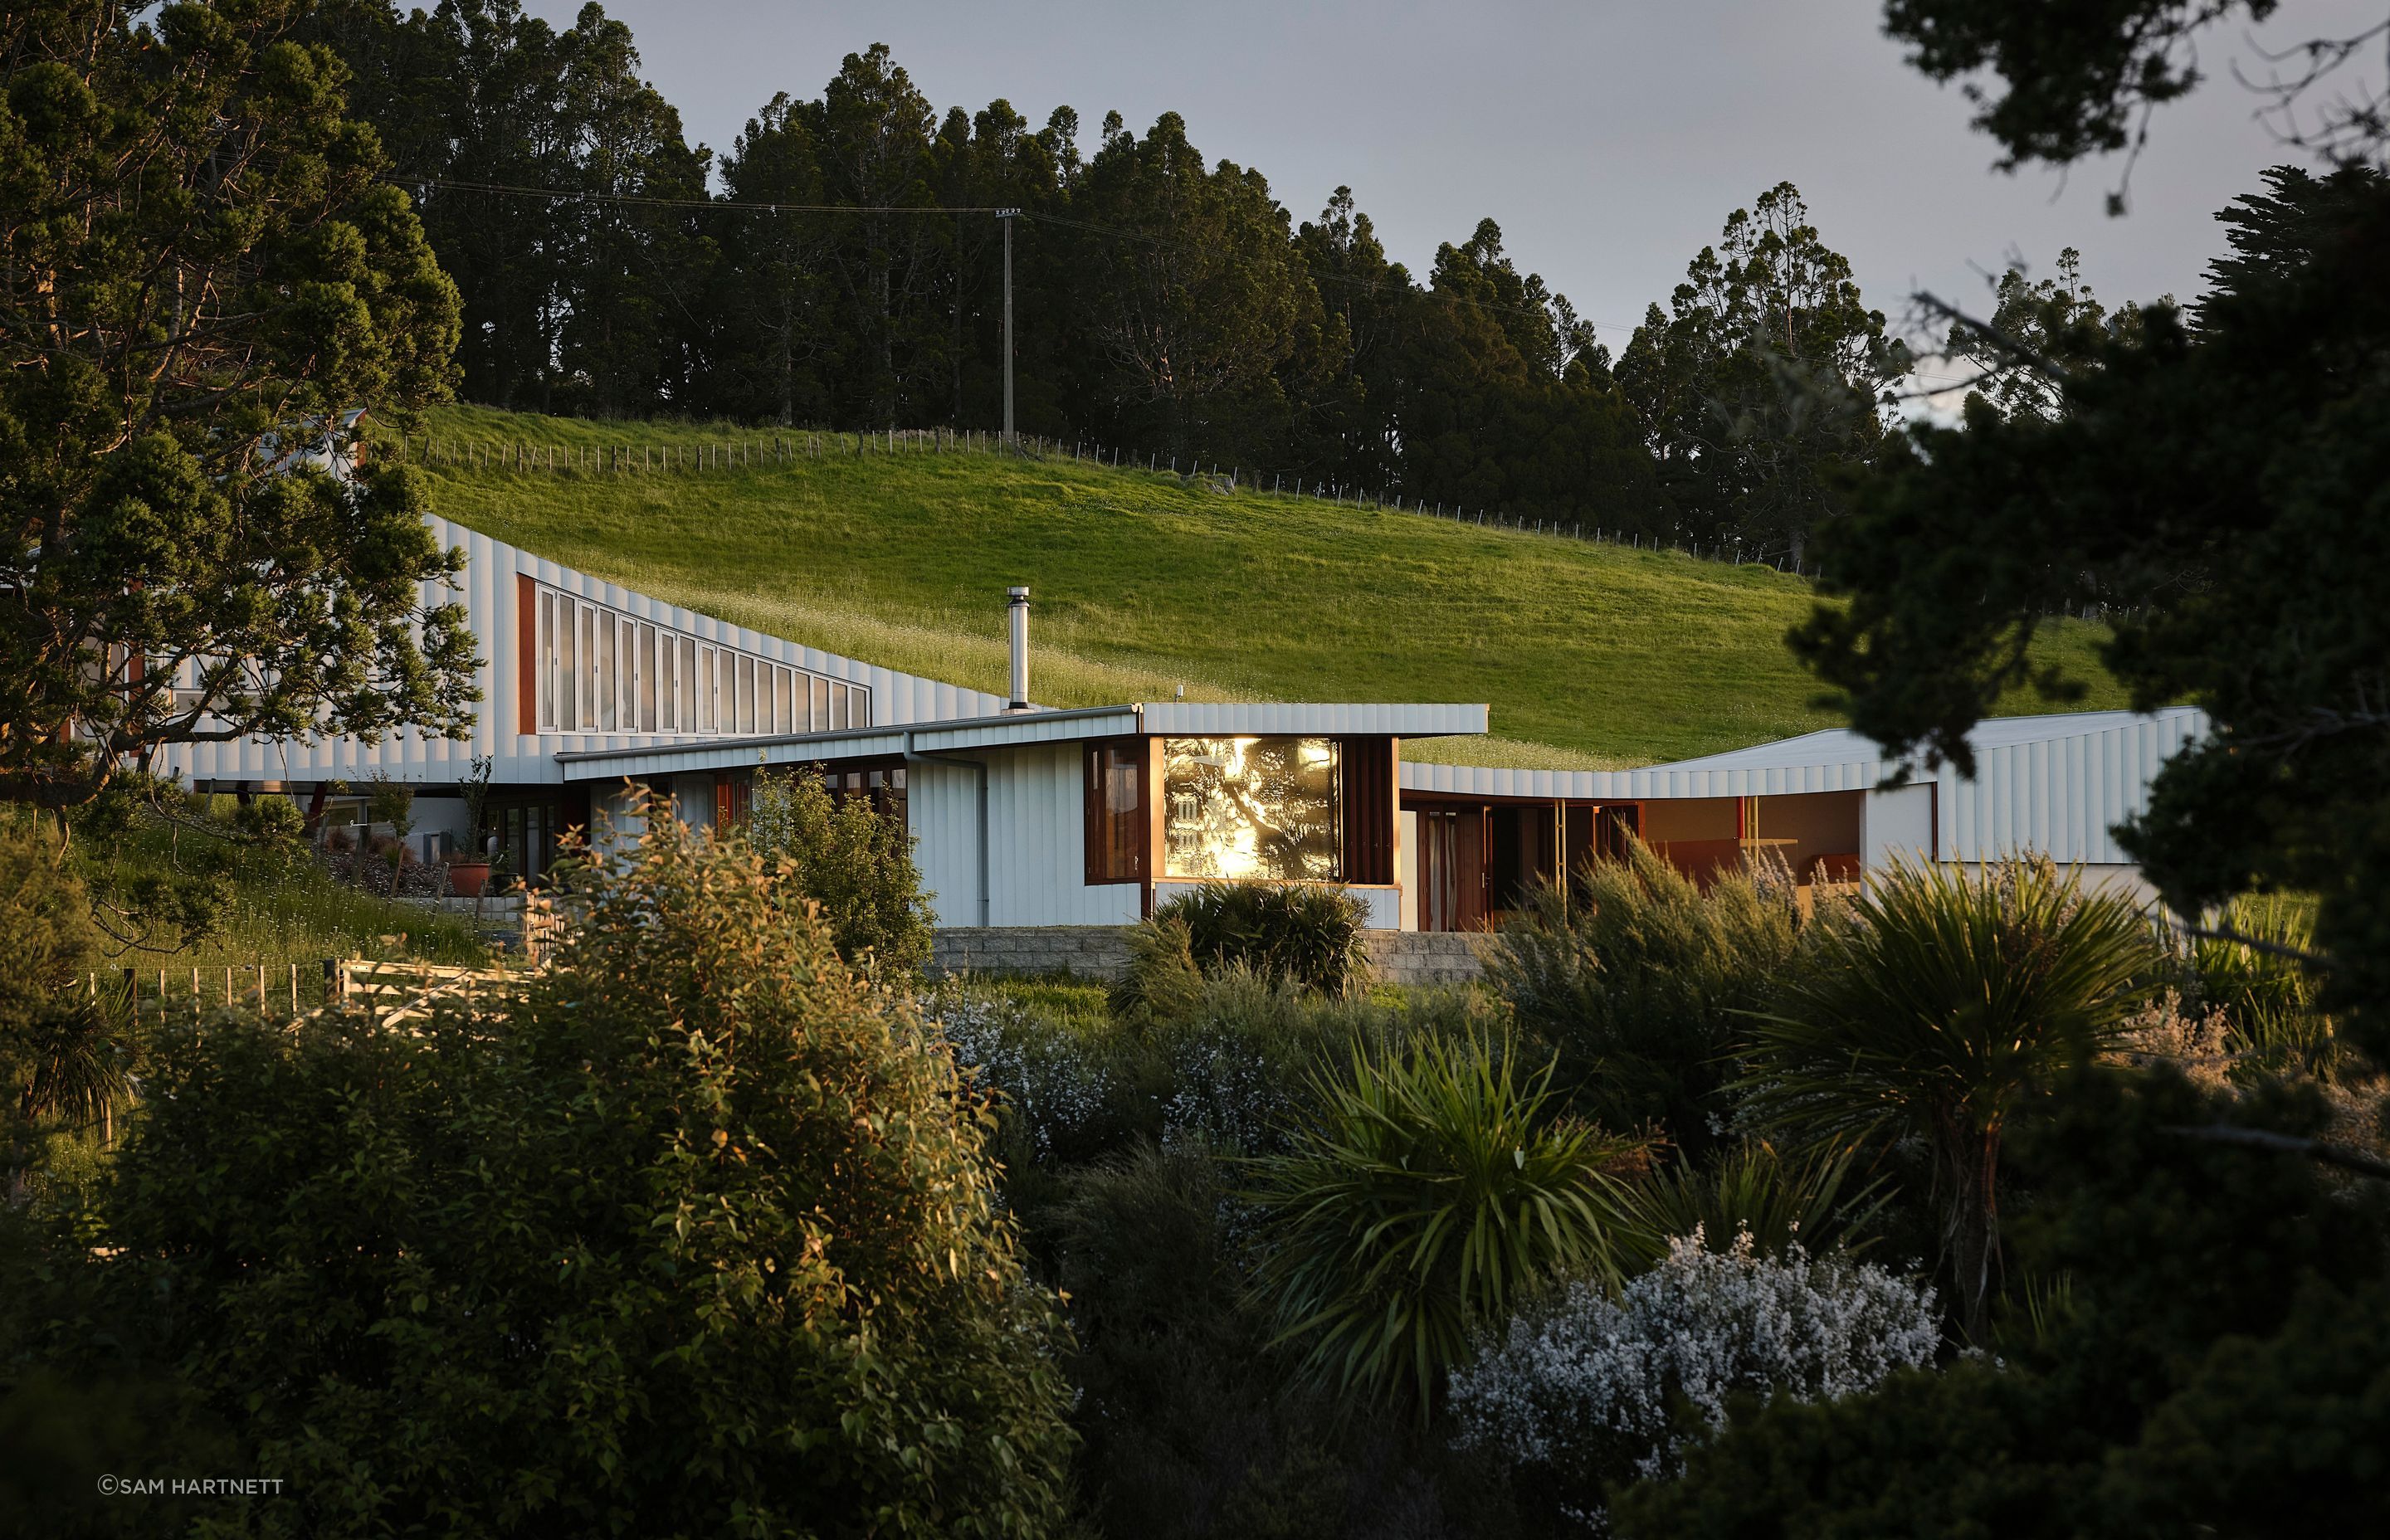 The undulation of the surrounding hills was a primary inspiration for the striking curvature of the home's silhouette.